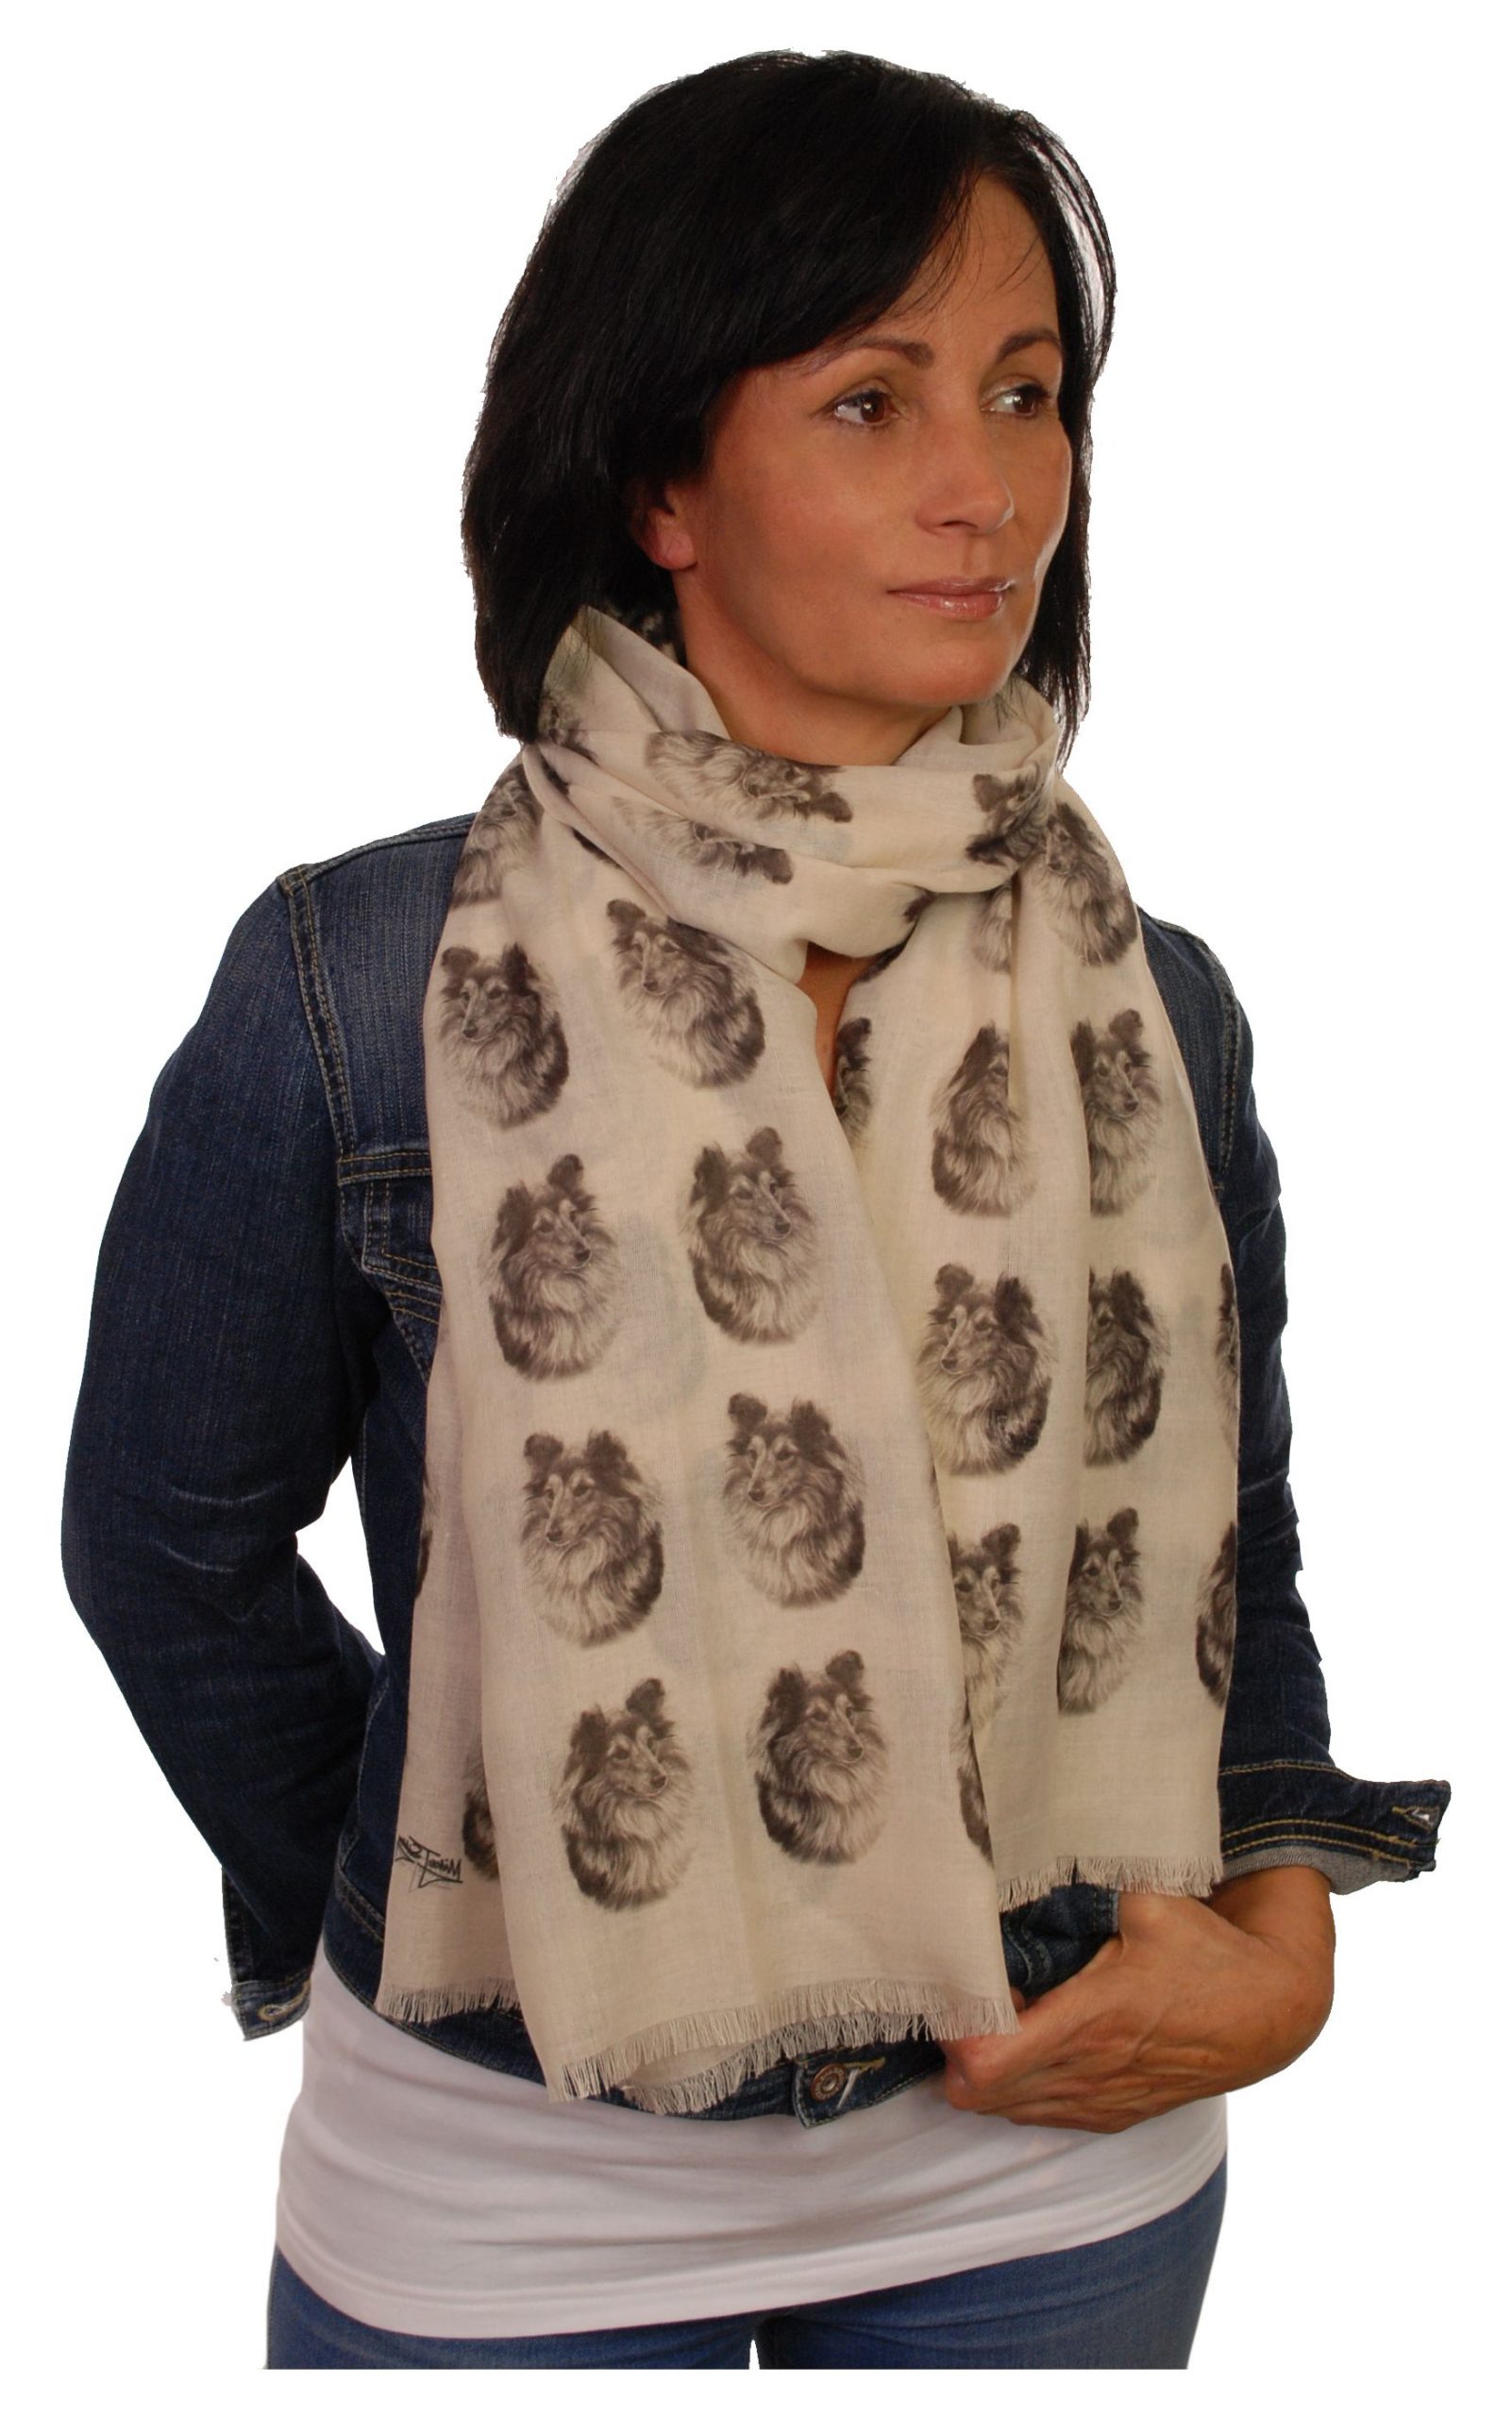 Scarf with Yorkshire Terrier Yorkie dog on womens fashion shawl wrap mike sibley 